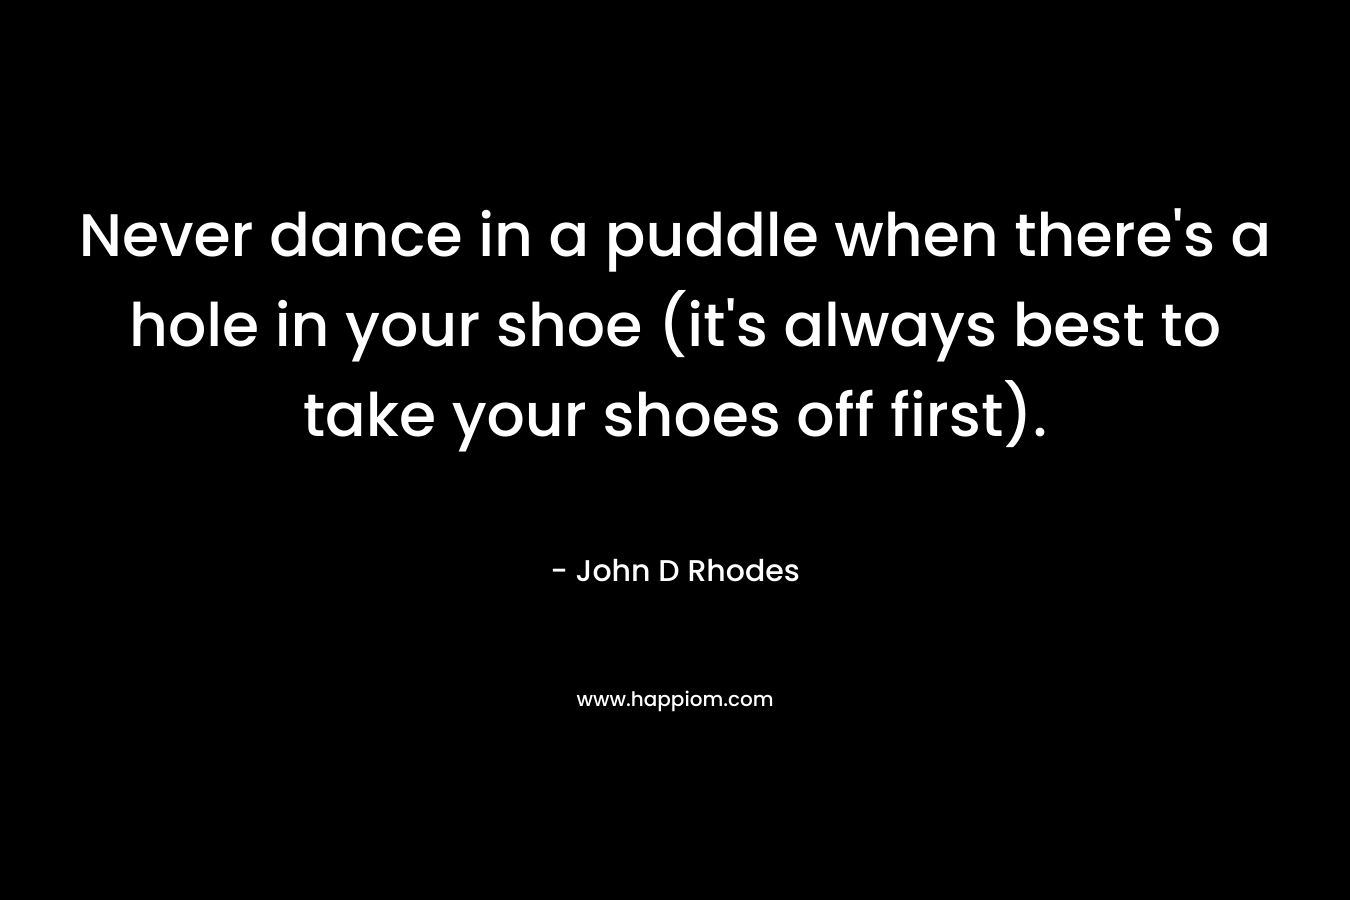 Never dance in a puddle when there’s a hole in your shoe (it’s always best to take your shoes off first). – John D Rhodes